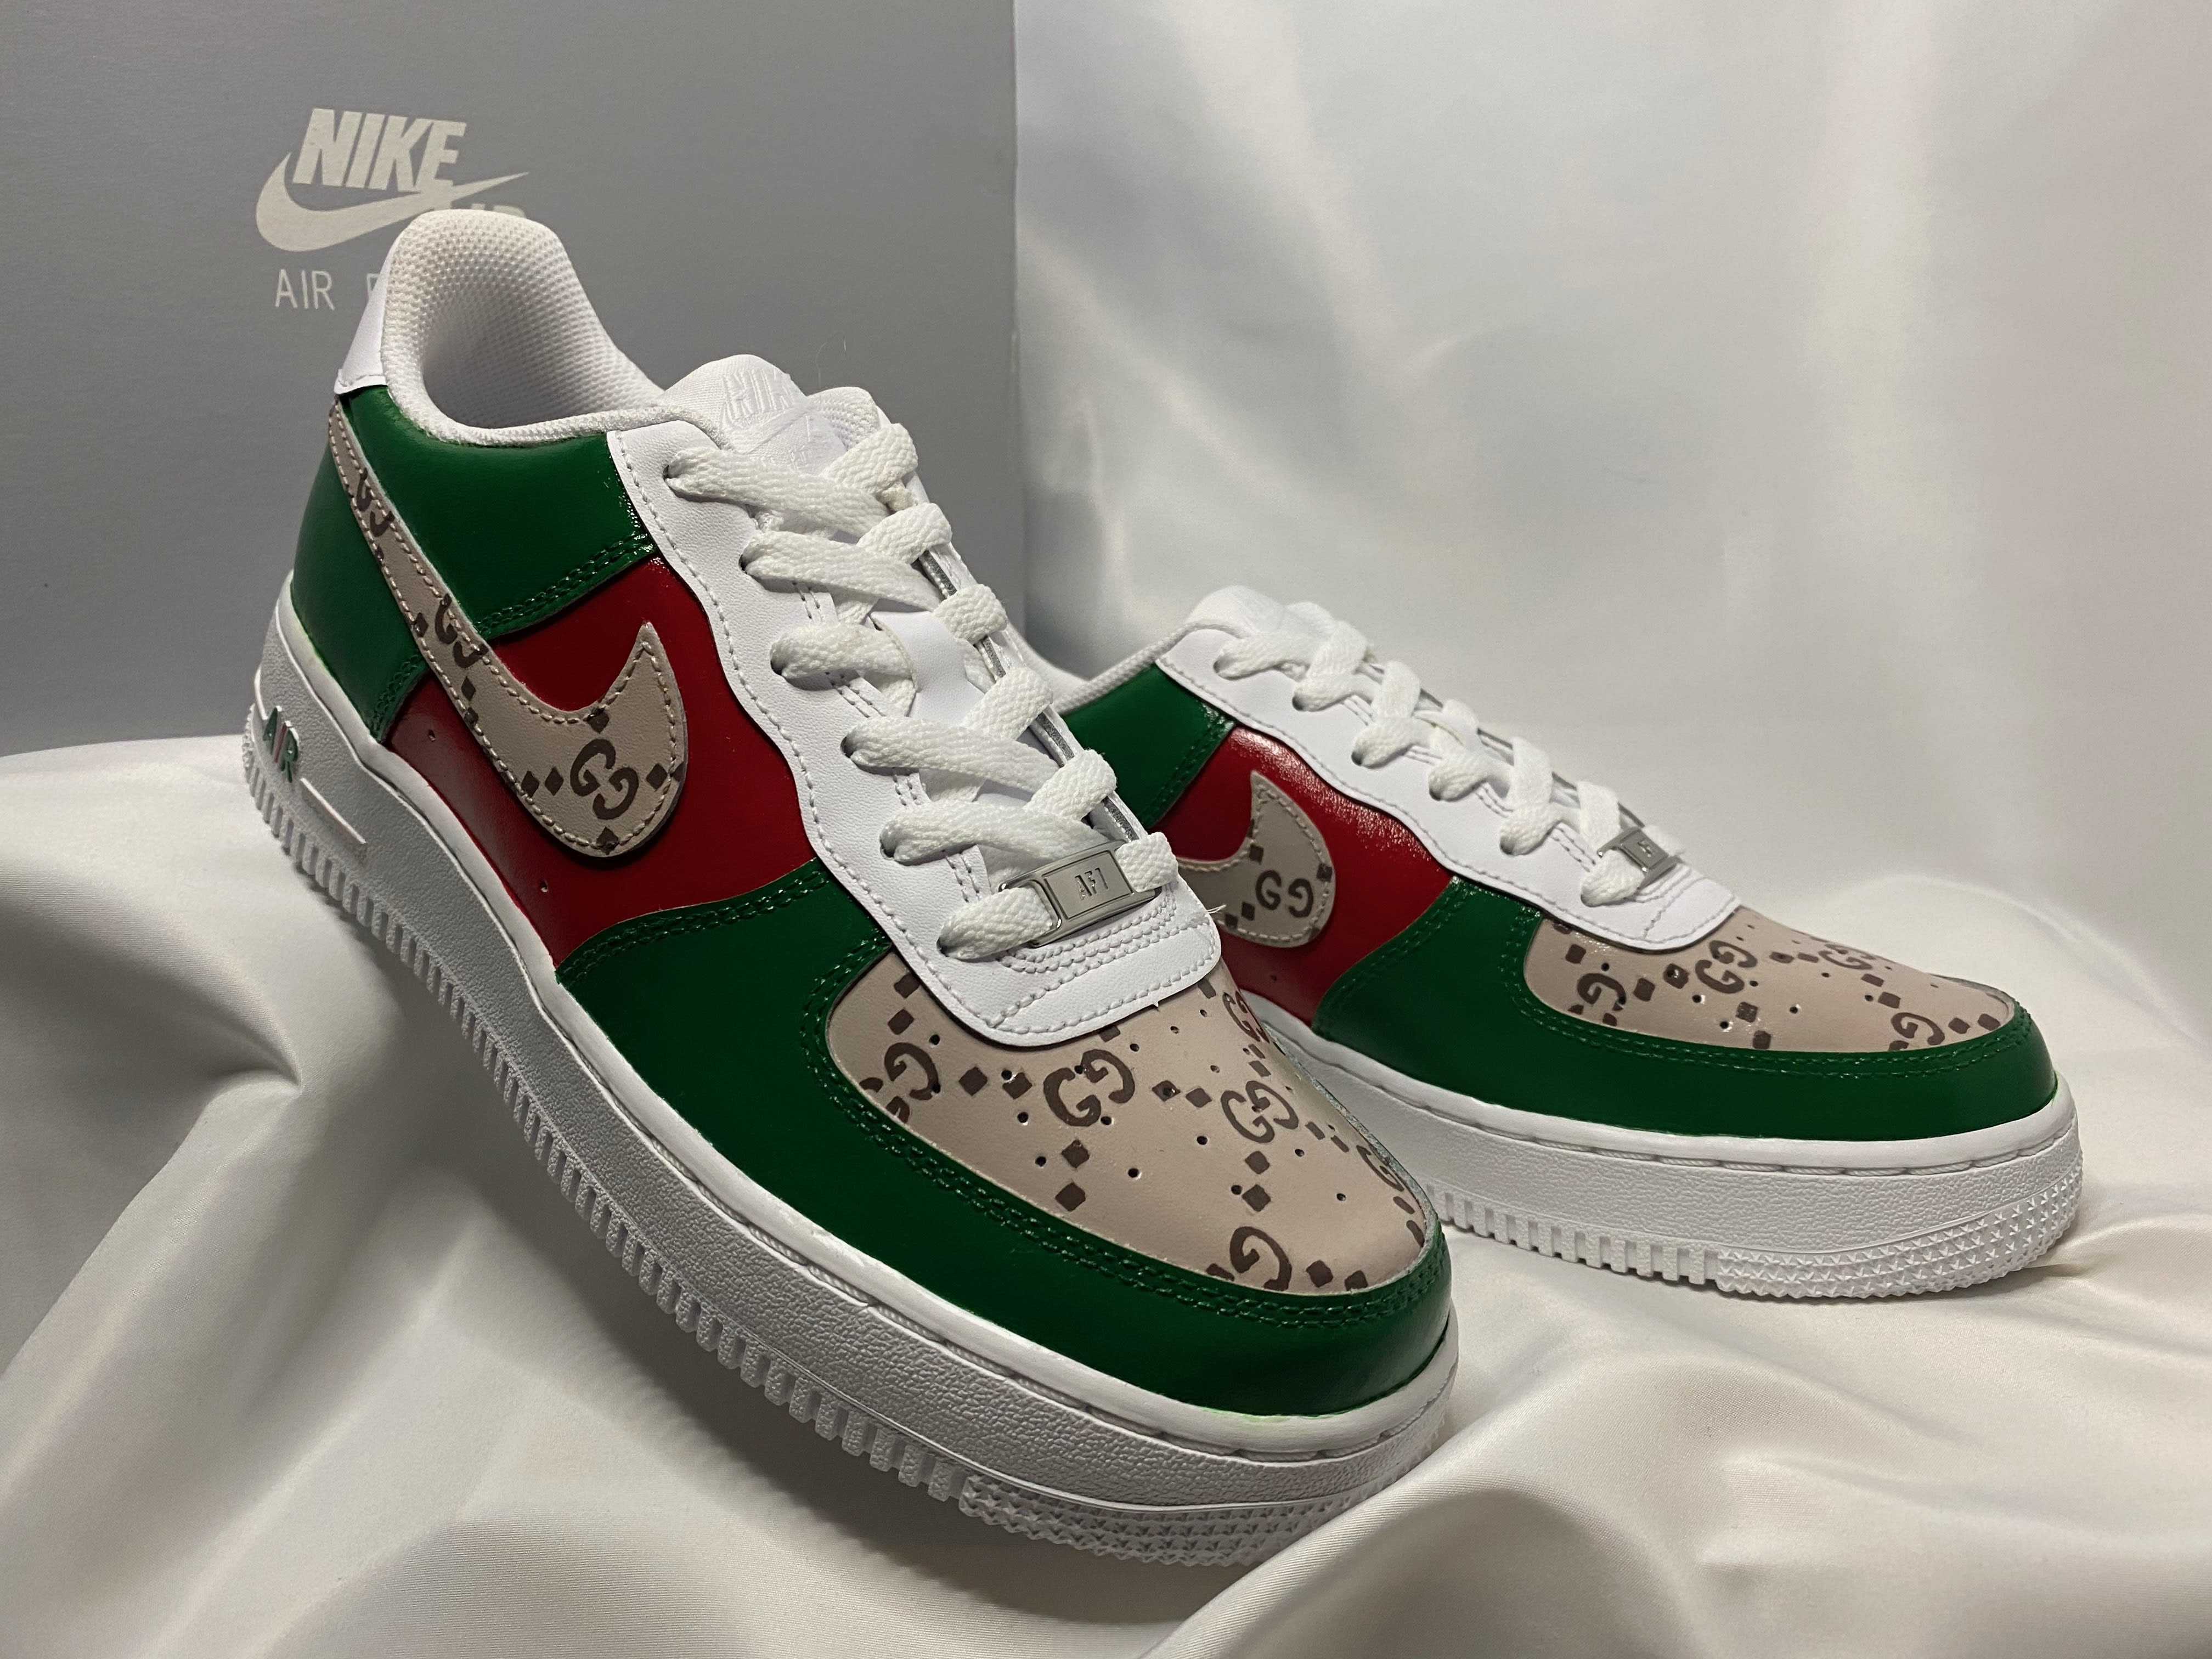 Men's Gucci Inspired Custom Air Force One